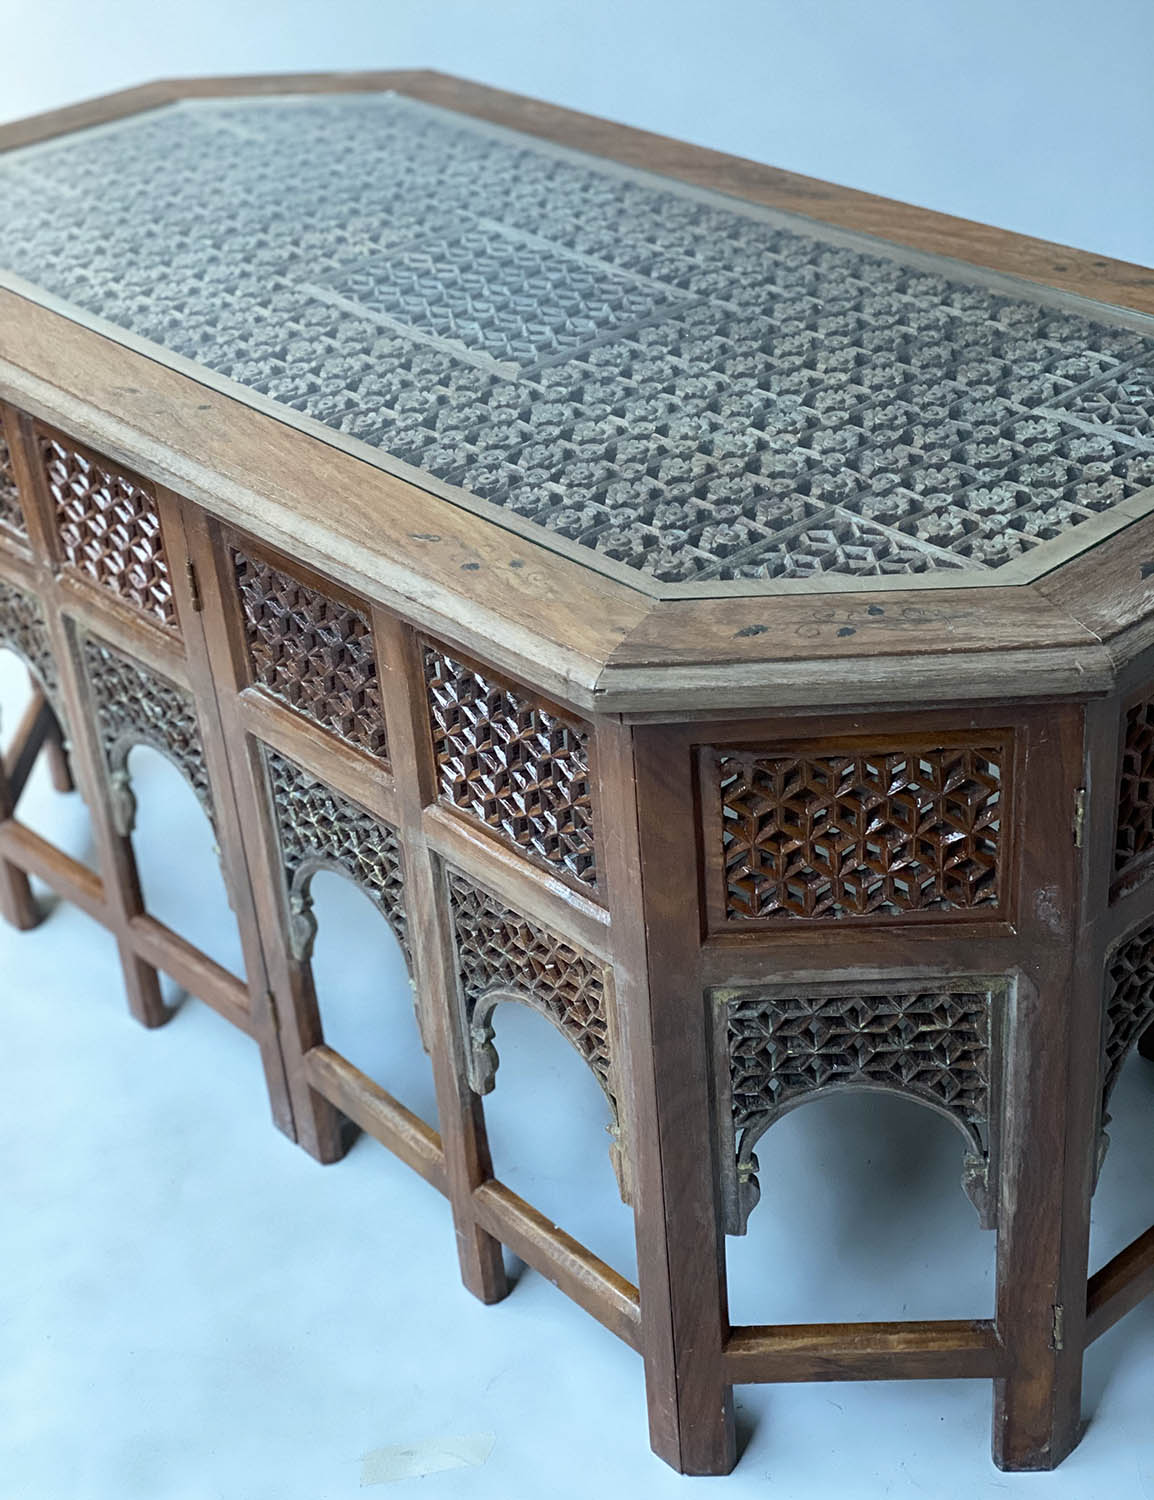 LOW TABLE, vintage Moorish teak and brass inlaid octagonal with pierced inset panels and glass - Image 6 of 7